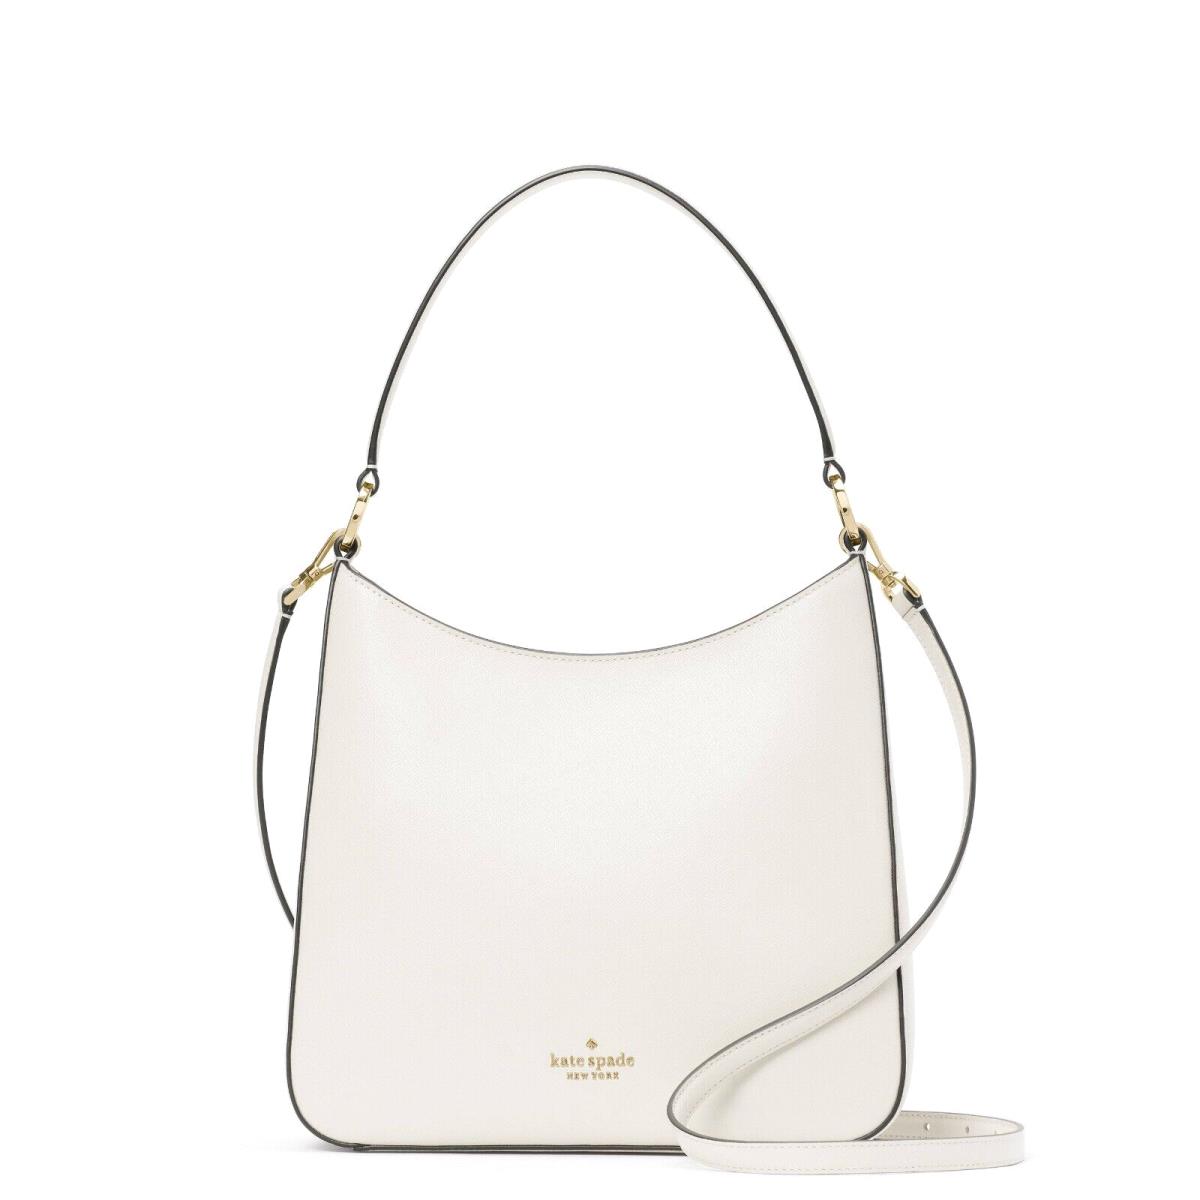 New Kate Spade Perry Leather Shoulder Bag Parchment - Exterior: